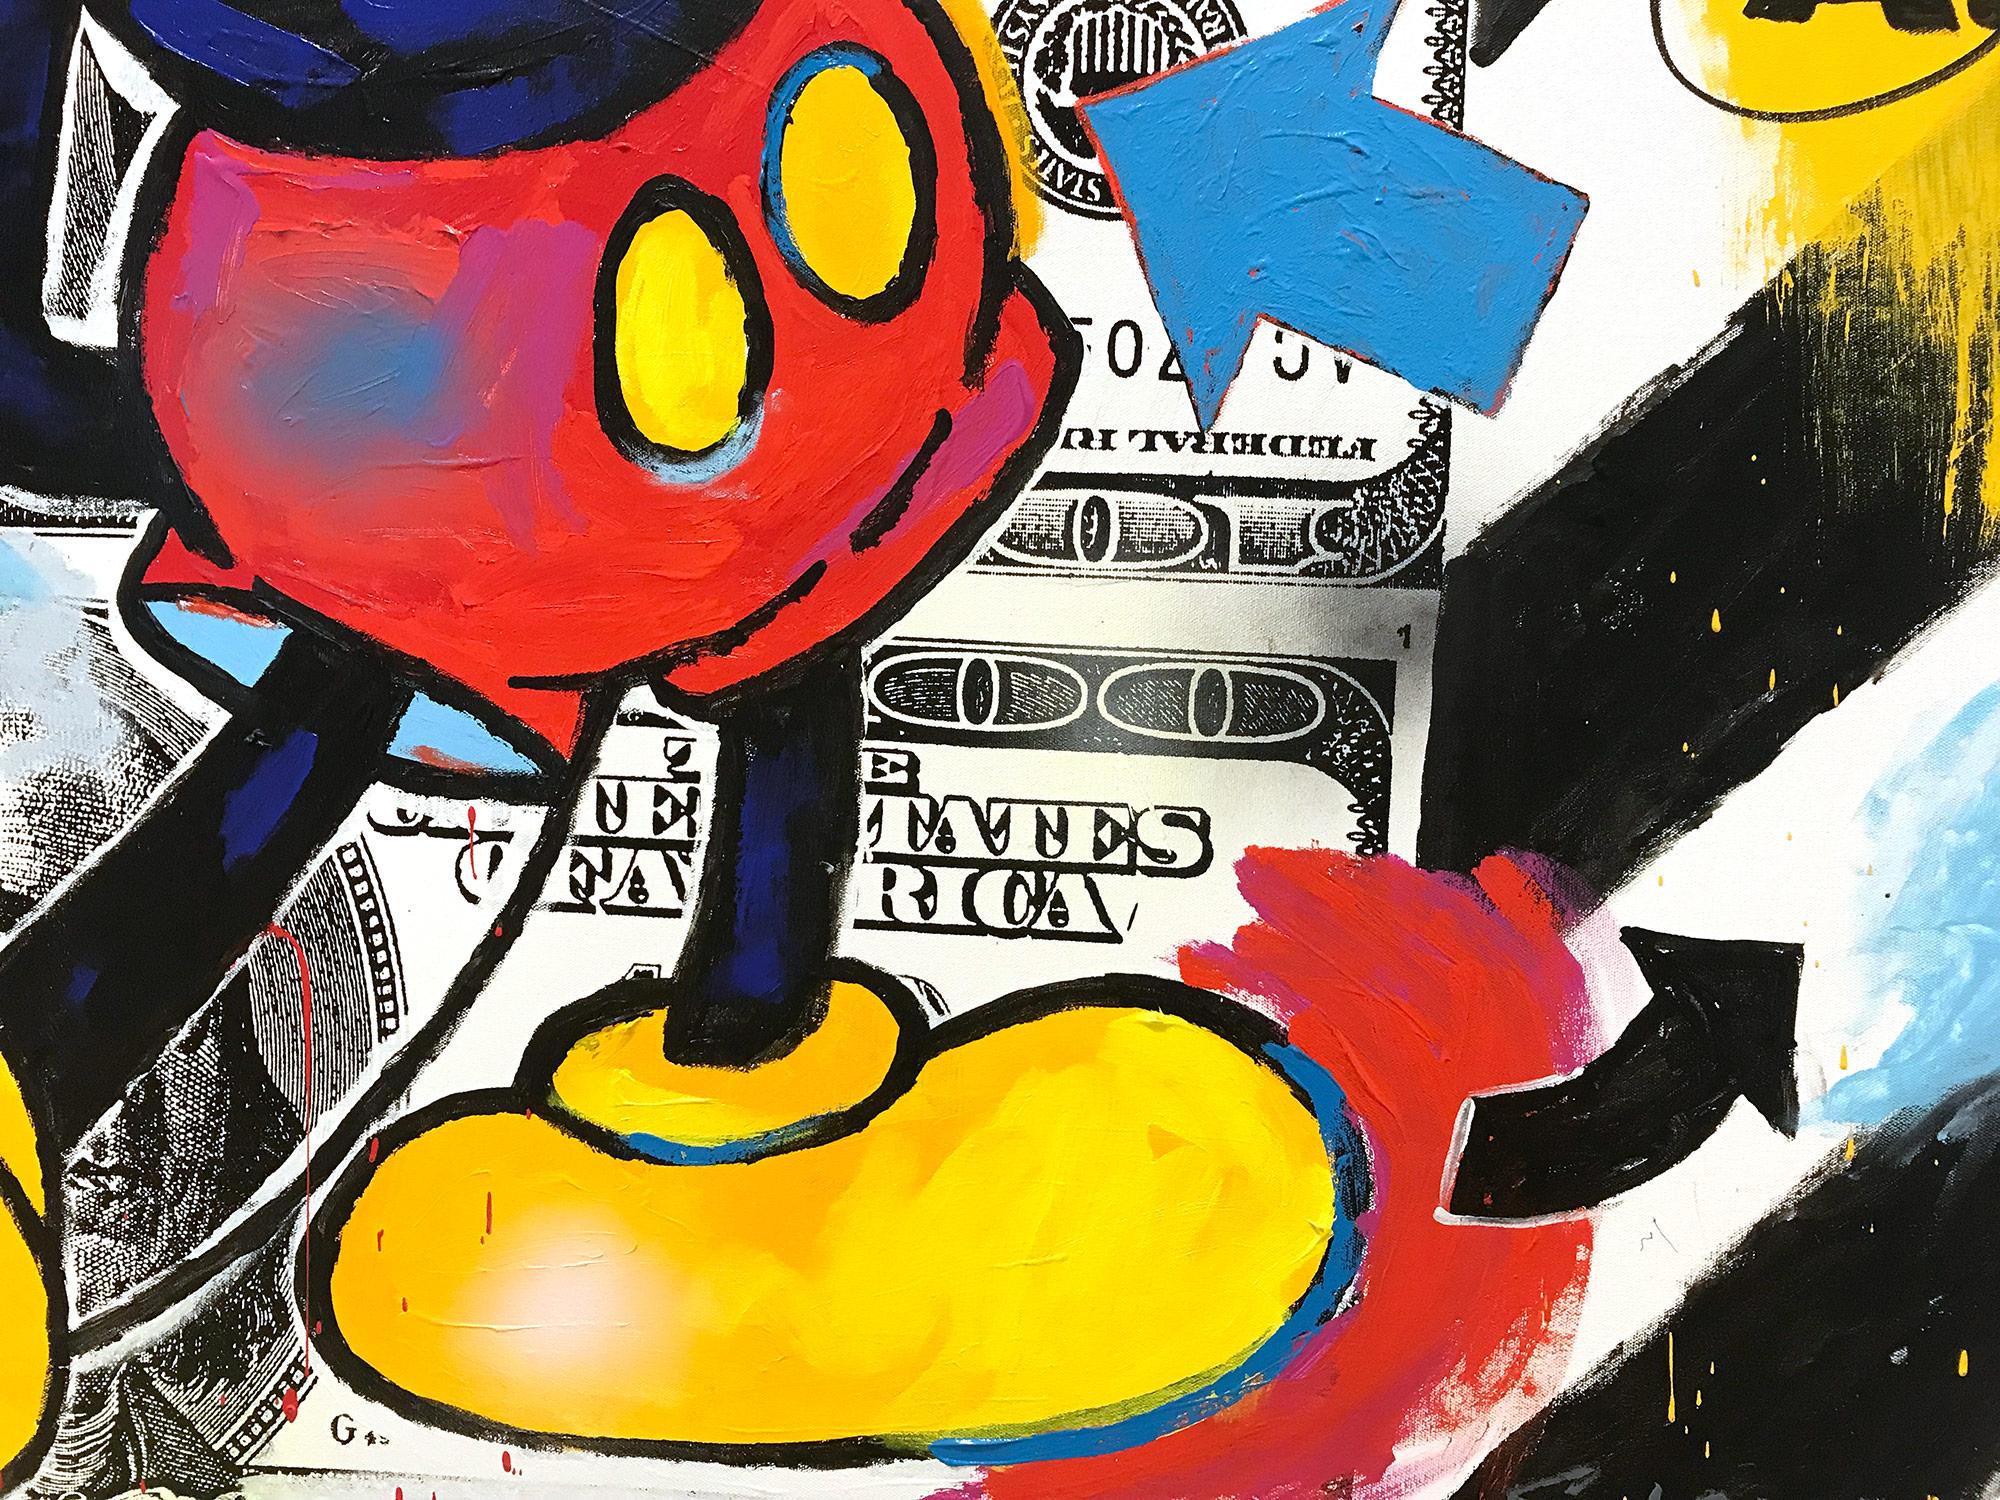 A pop piece depicting Mickey Mouse juxtaposed with 100 Dollar Bills. With impasto painting, thrown paint and quick brushwork we are drawn to the movement, as the artist is able to engage his viewer with contrasting highlights and shadow. This piece